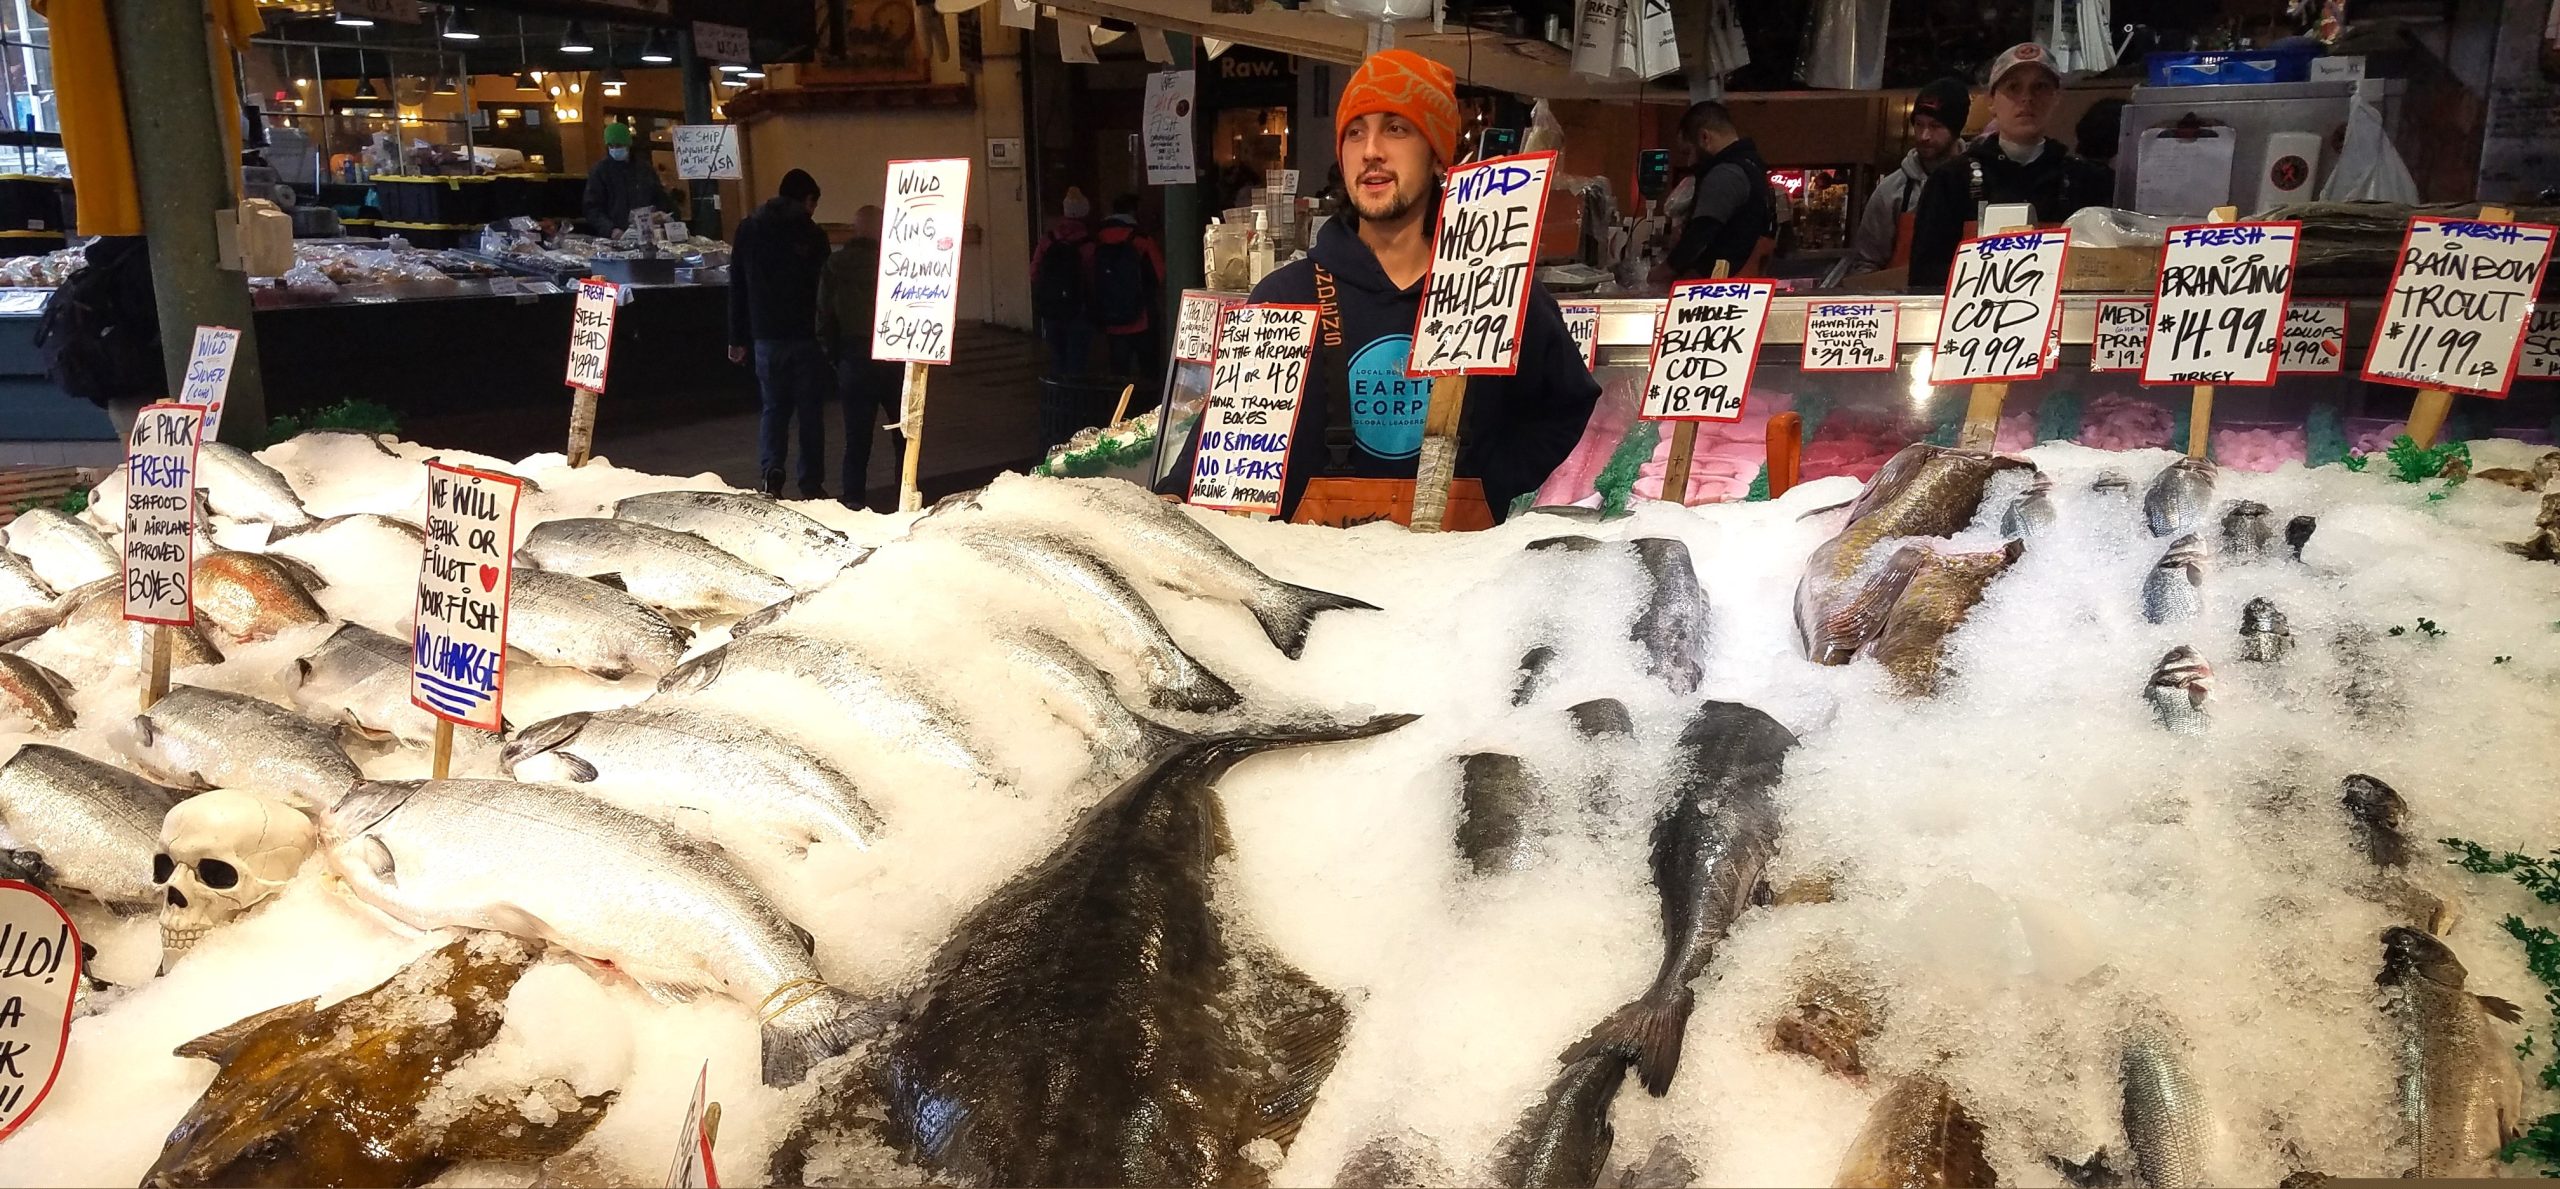 Pike Place Fish Market, where the fish are fresh and the employees are fun.